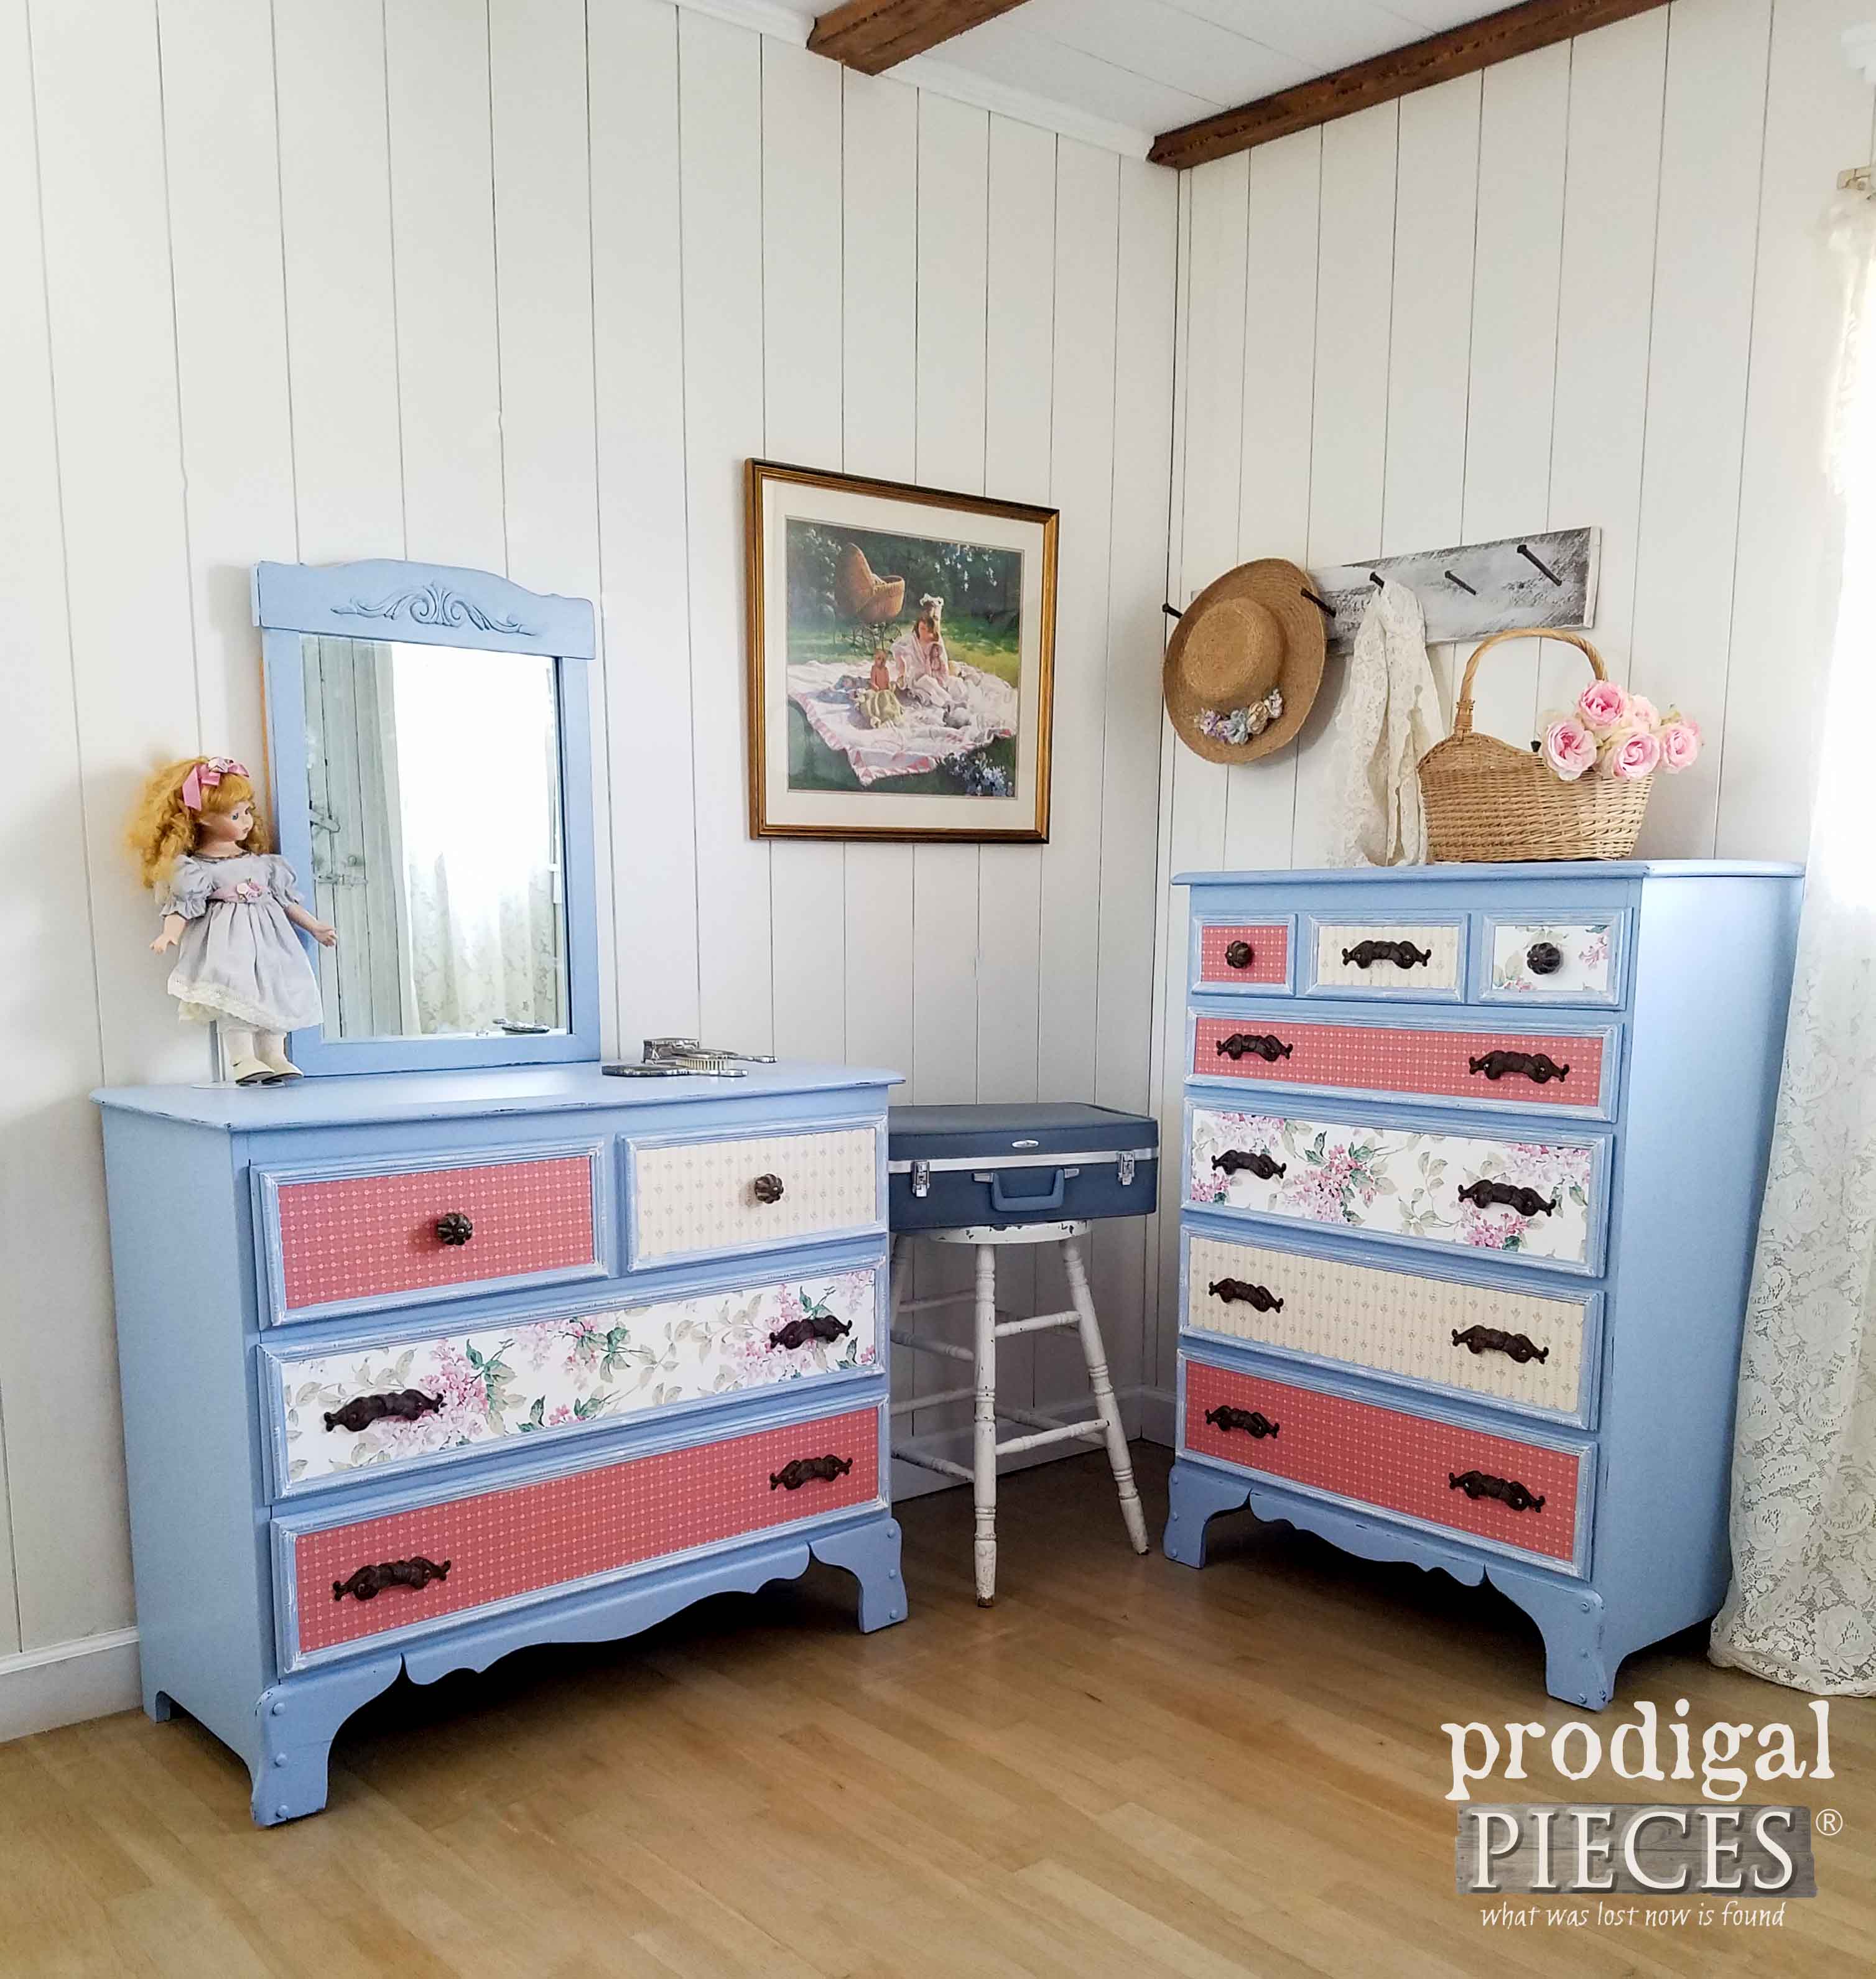 Vintage Girls Bedroom Set Makeover with Paper, Pulls, and Paint by Prodigal Pieces | prodigalpieces.com